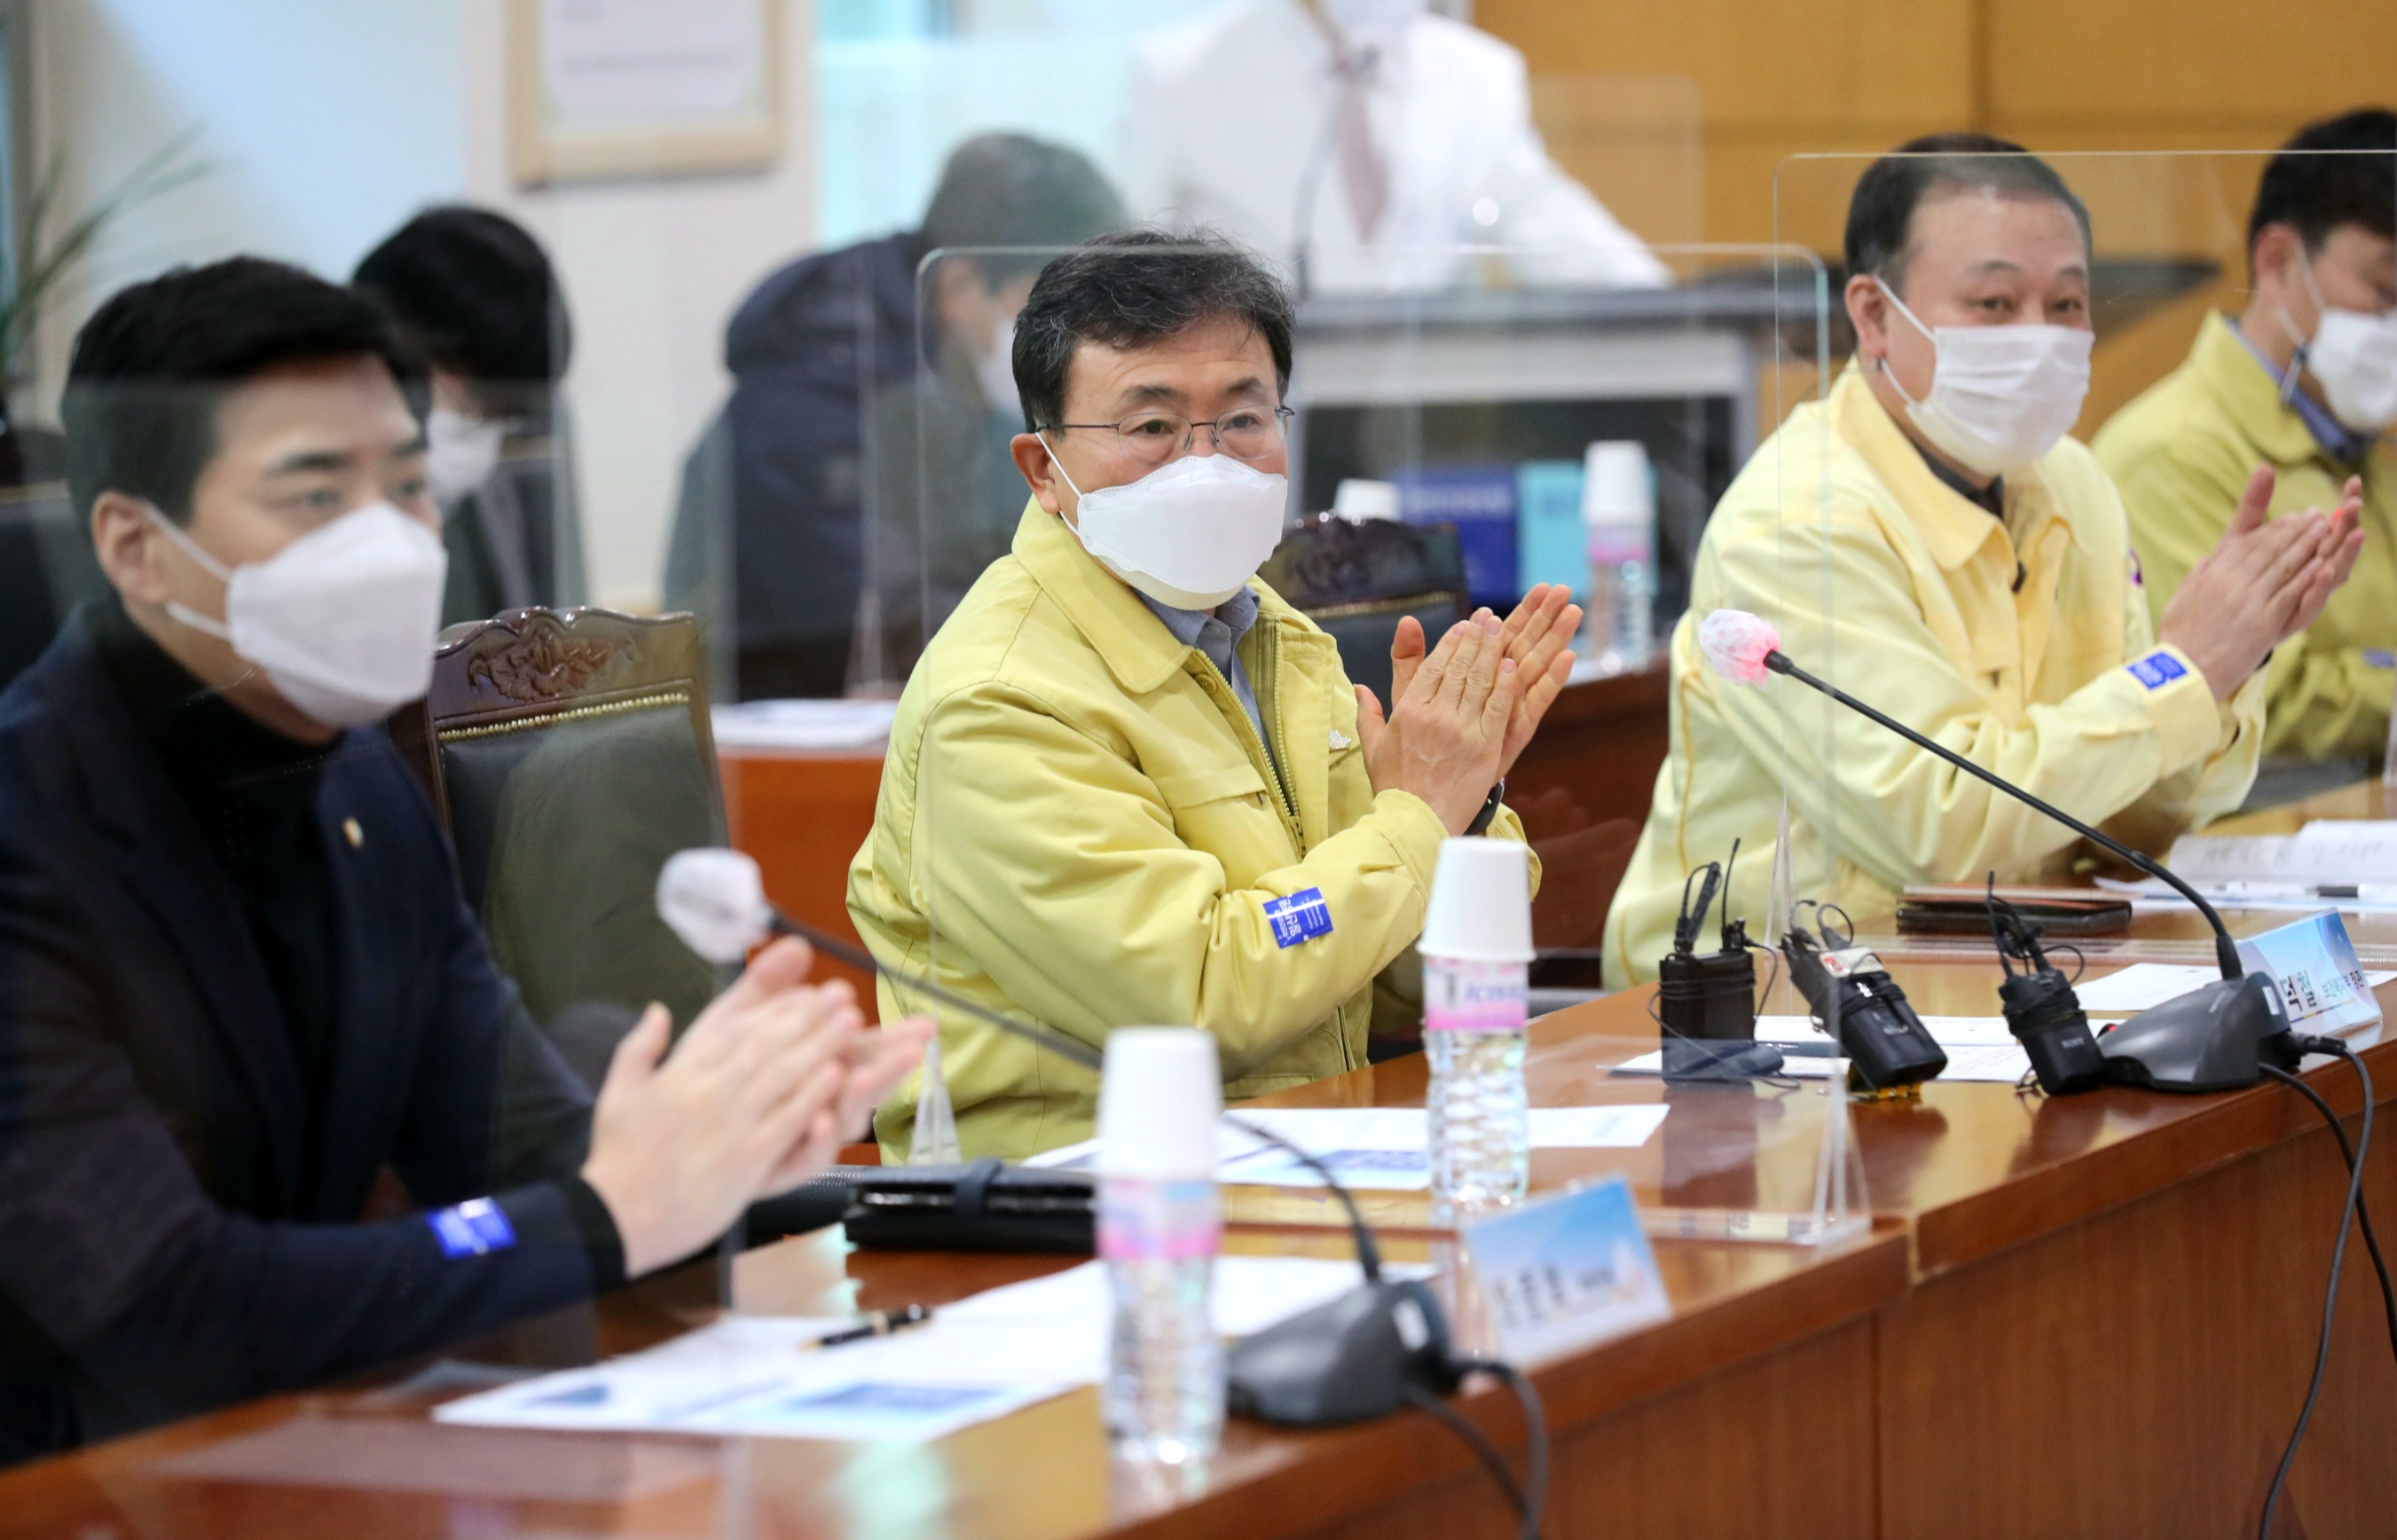 Minister Kwon Checks Hospital Networks in North Gyeonggi for COVID-19 Treatment (January 3) 사진1